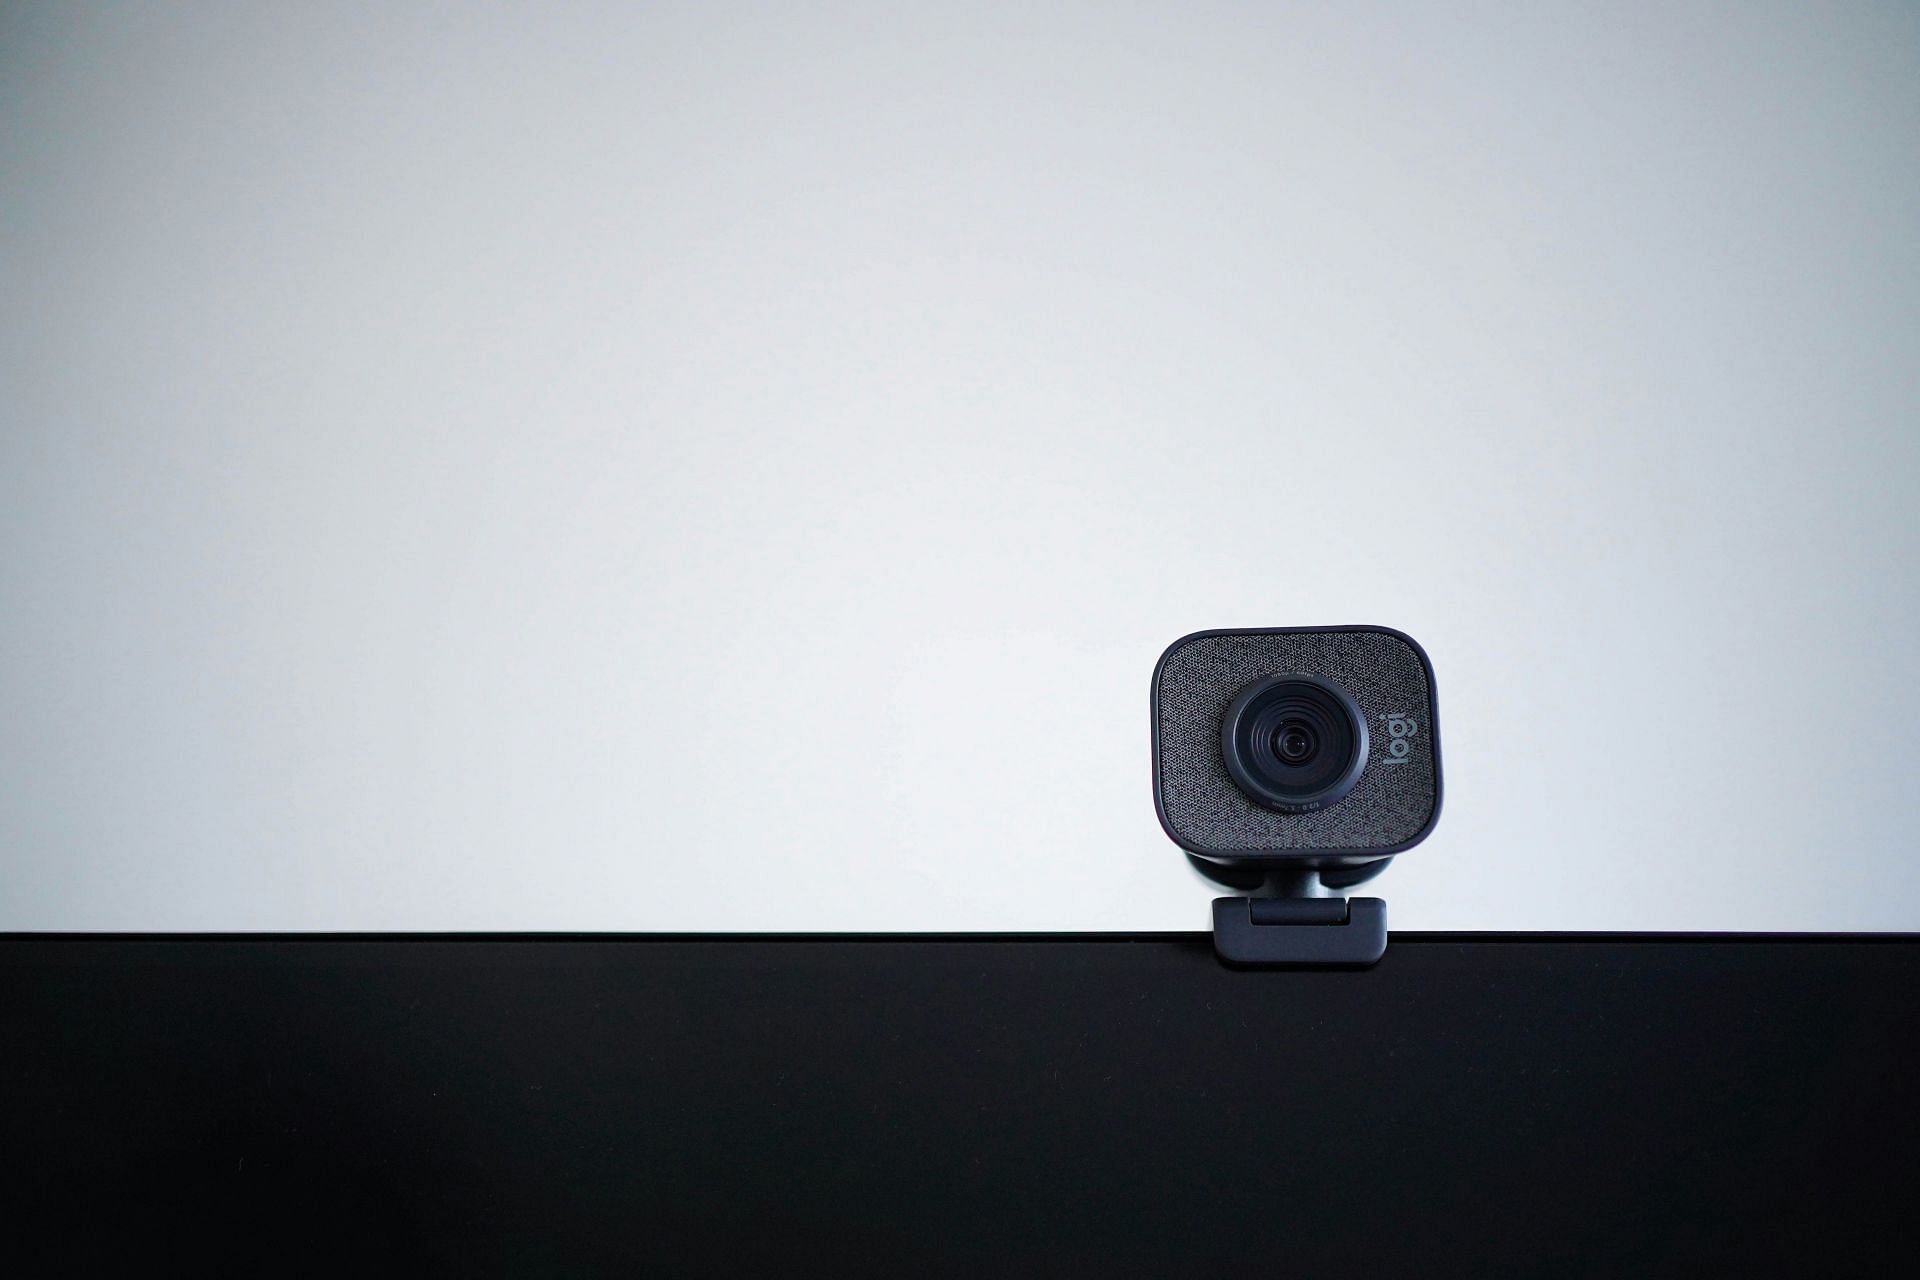 Webcams for Streaming Games